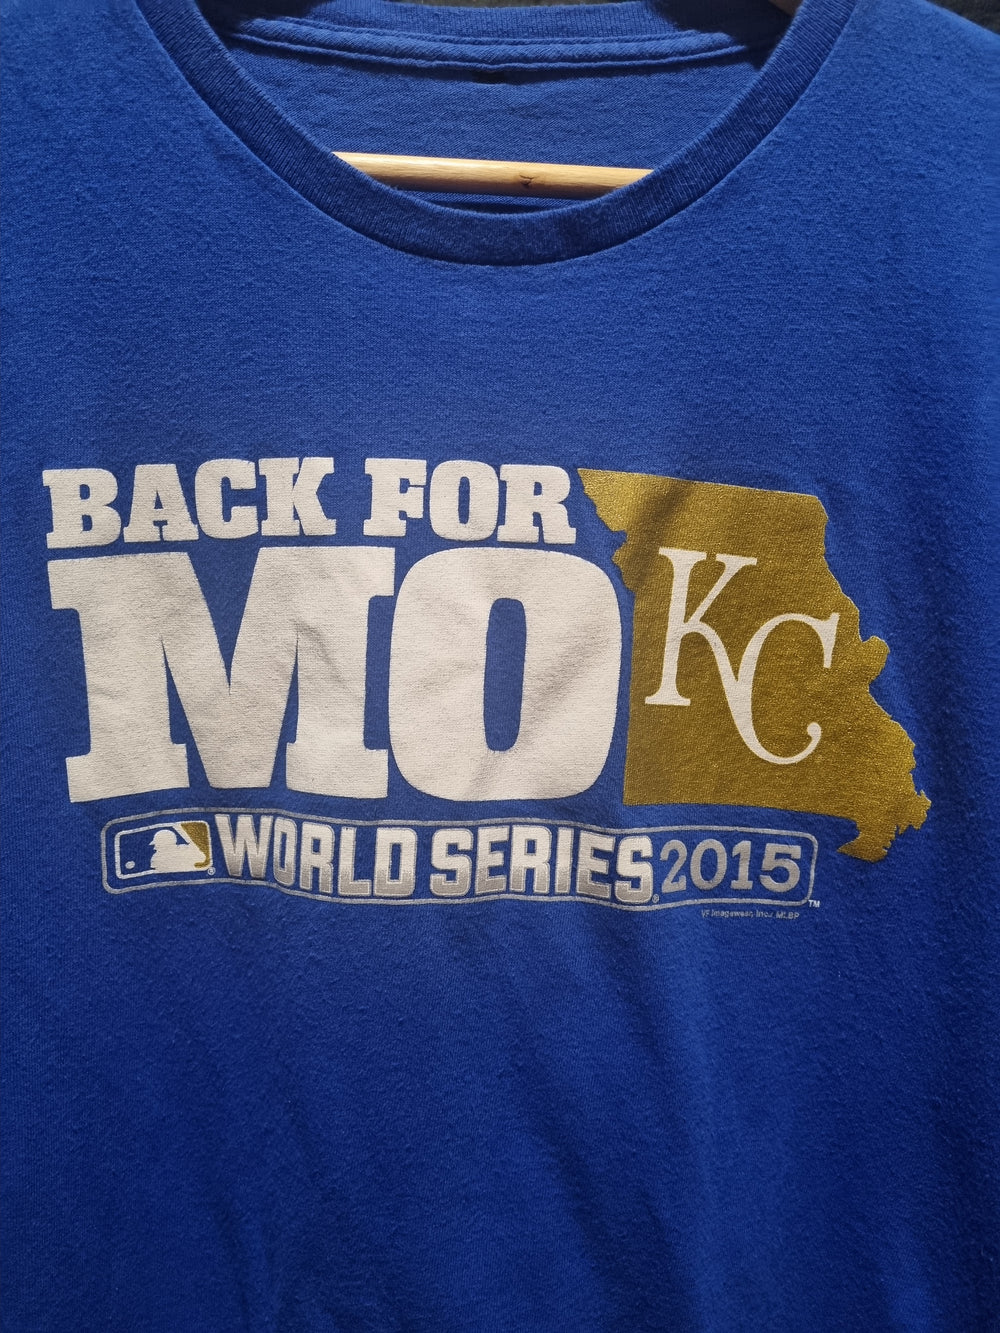 Back for MO KC World Series 2015 XL